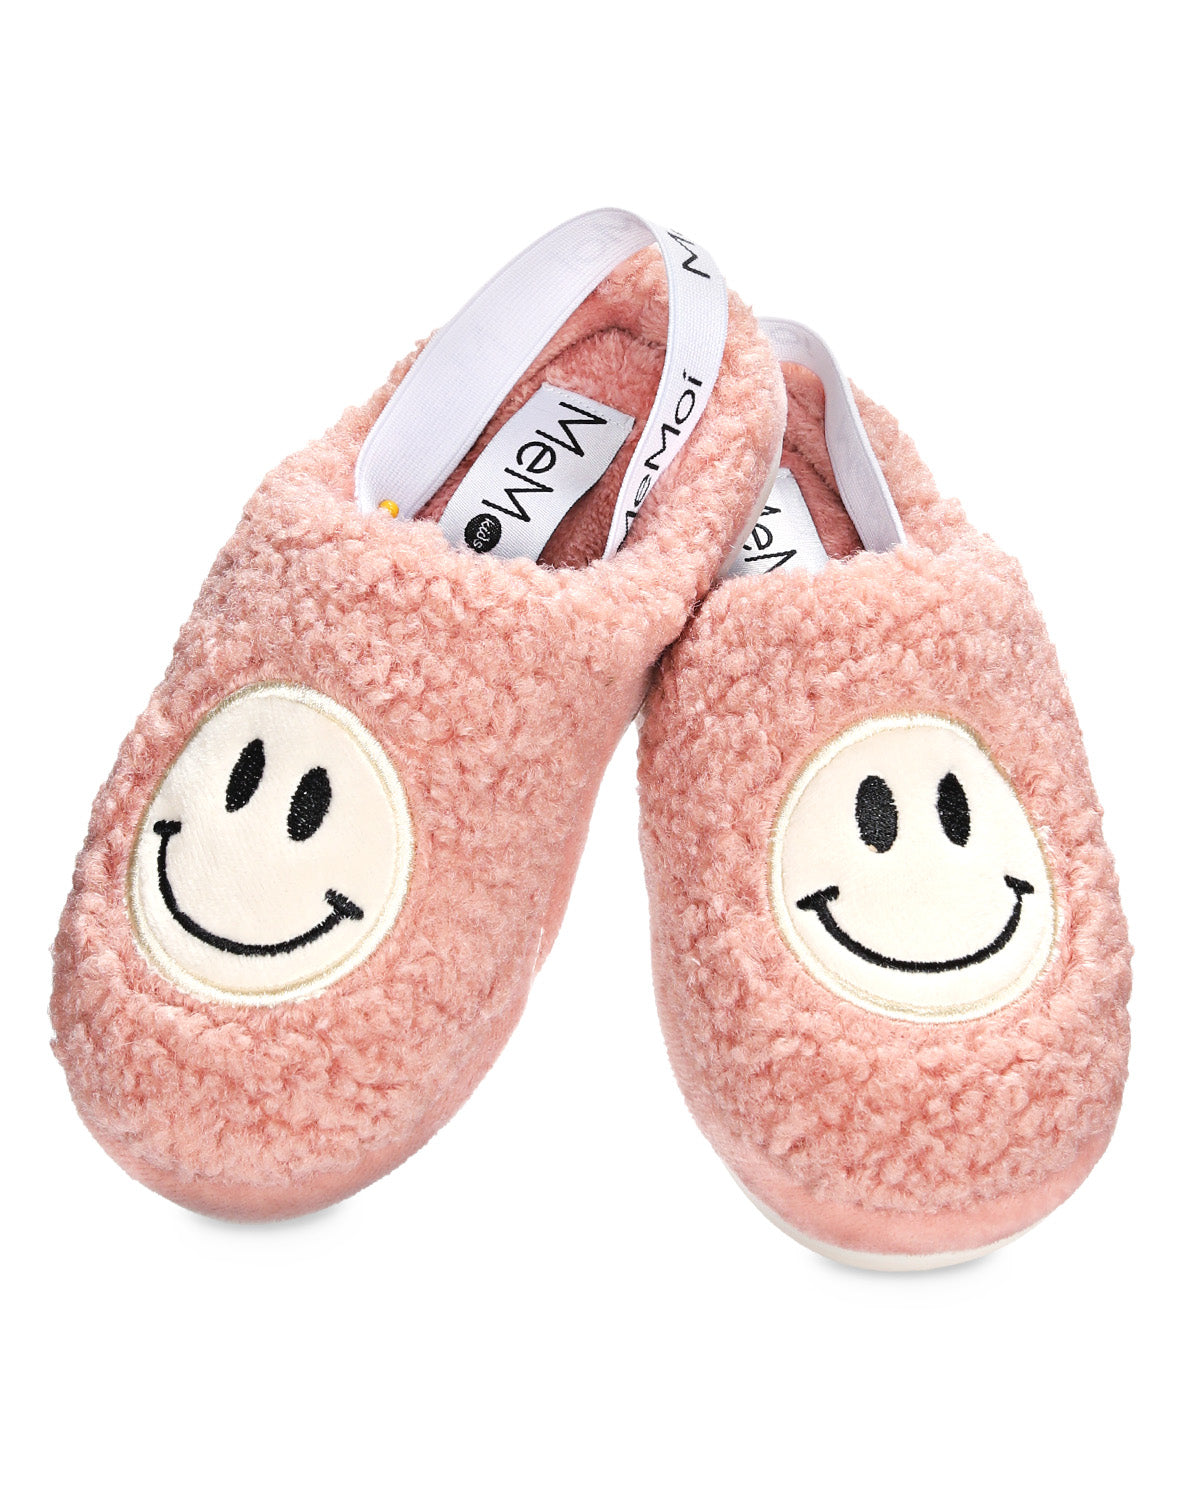 Kids' Smiley Face Non-Skid Slippers